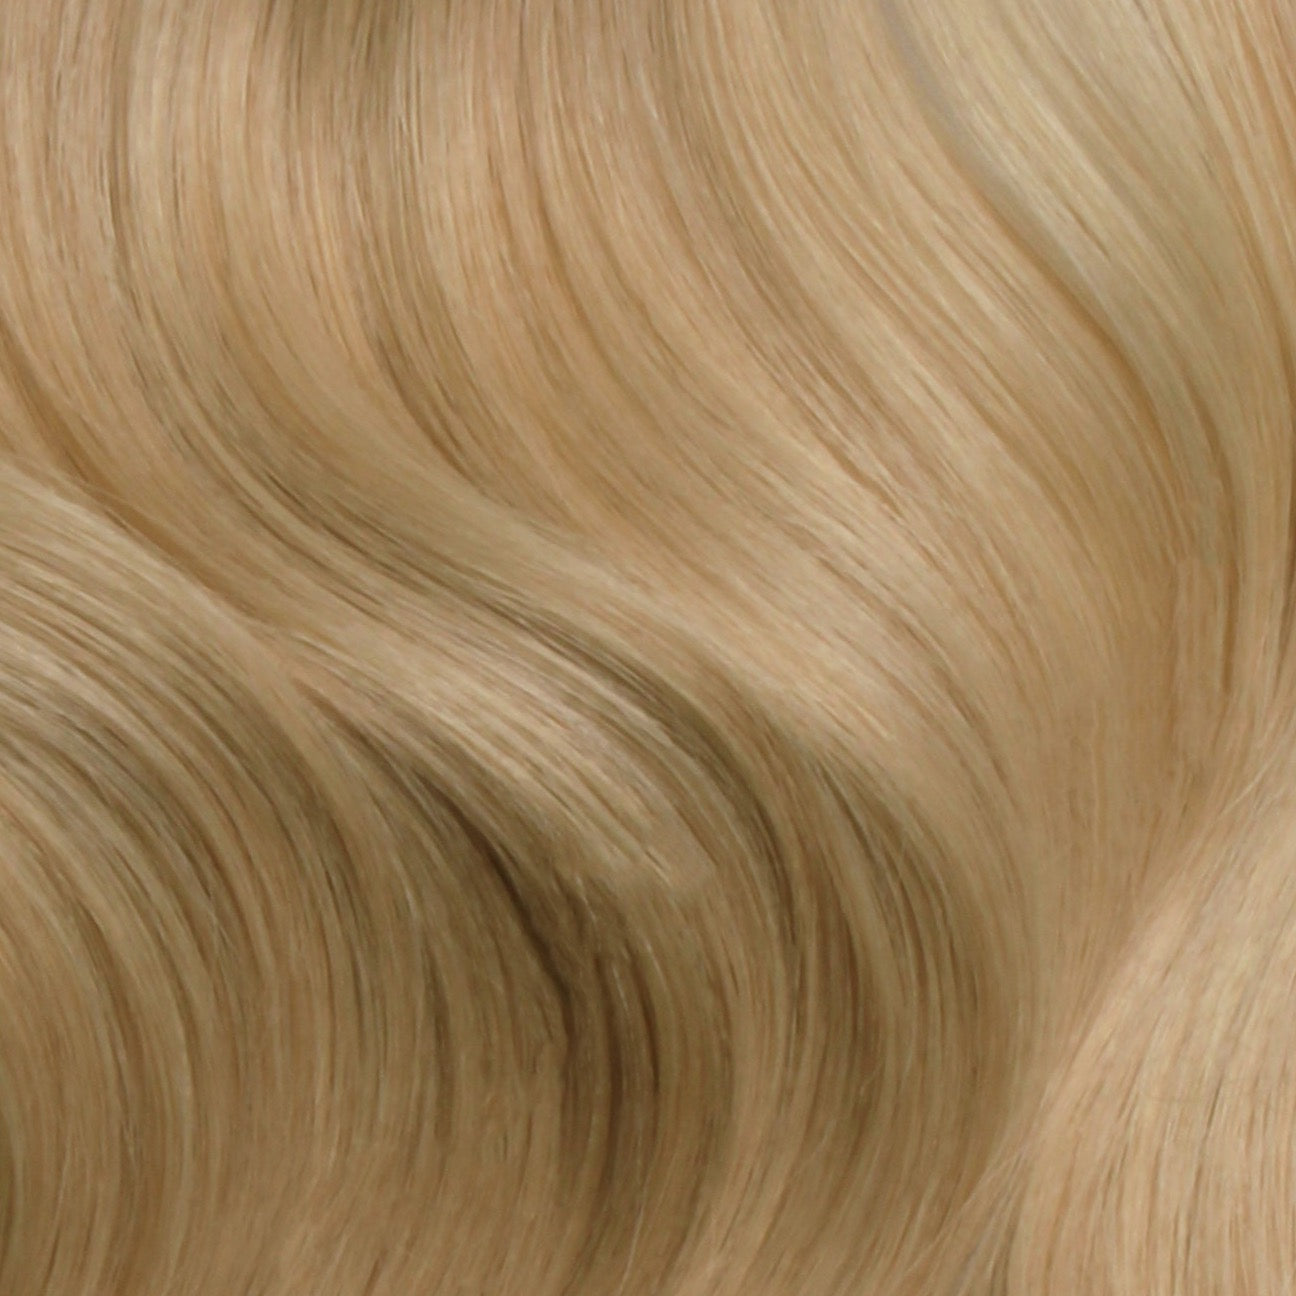 Flat Tip Bonds 18 Inches - SWAY Hair Extensions Beach-Blonde-18-22 SWAY Flat Tip Bonds, 18&quot;- 100% Remy Human Hair Extensions with Italian Keratin. Perfect for hair goals.